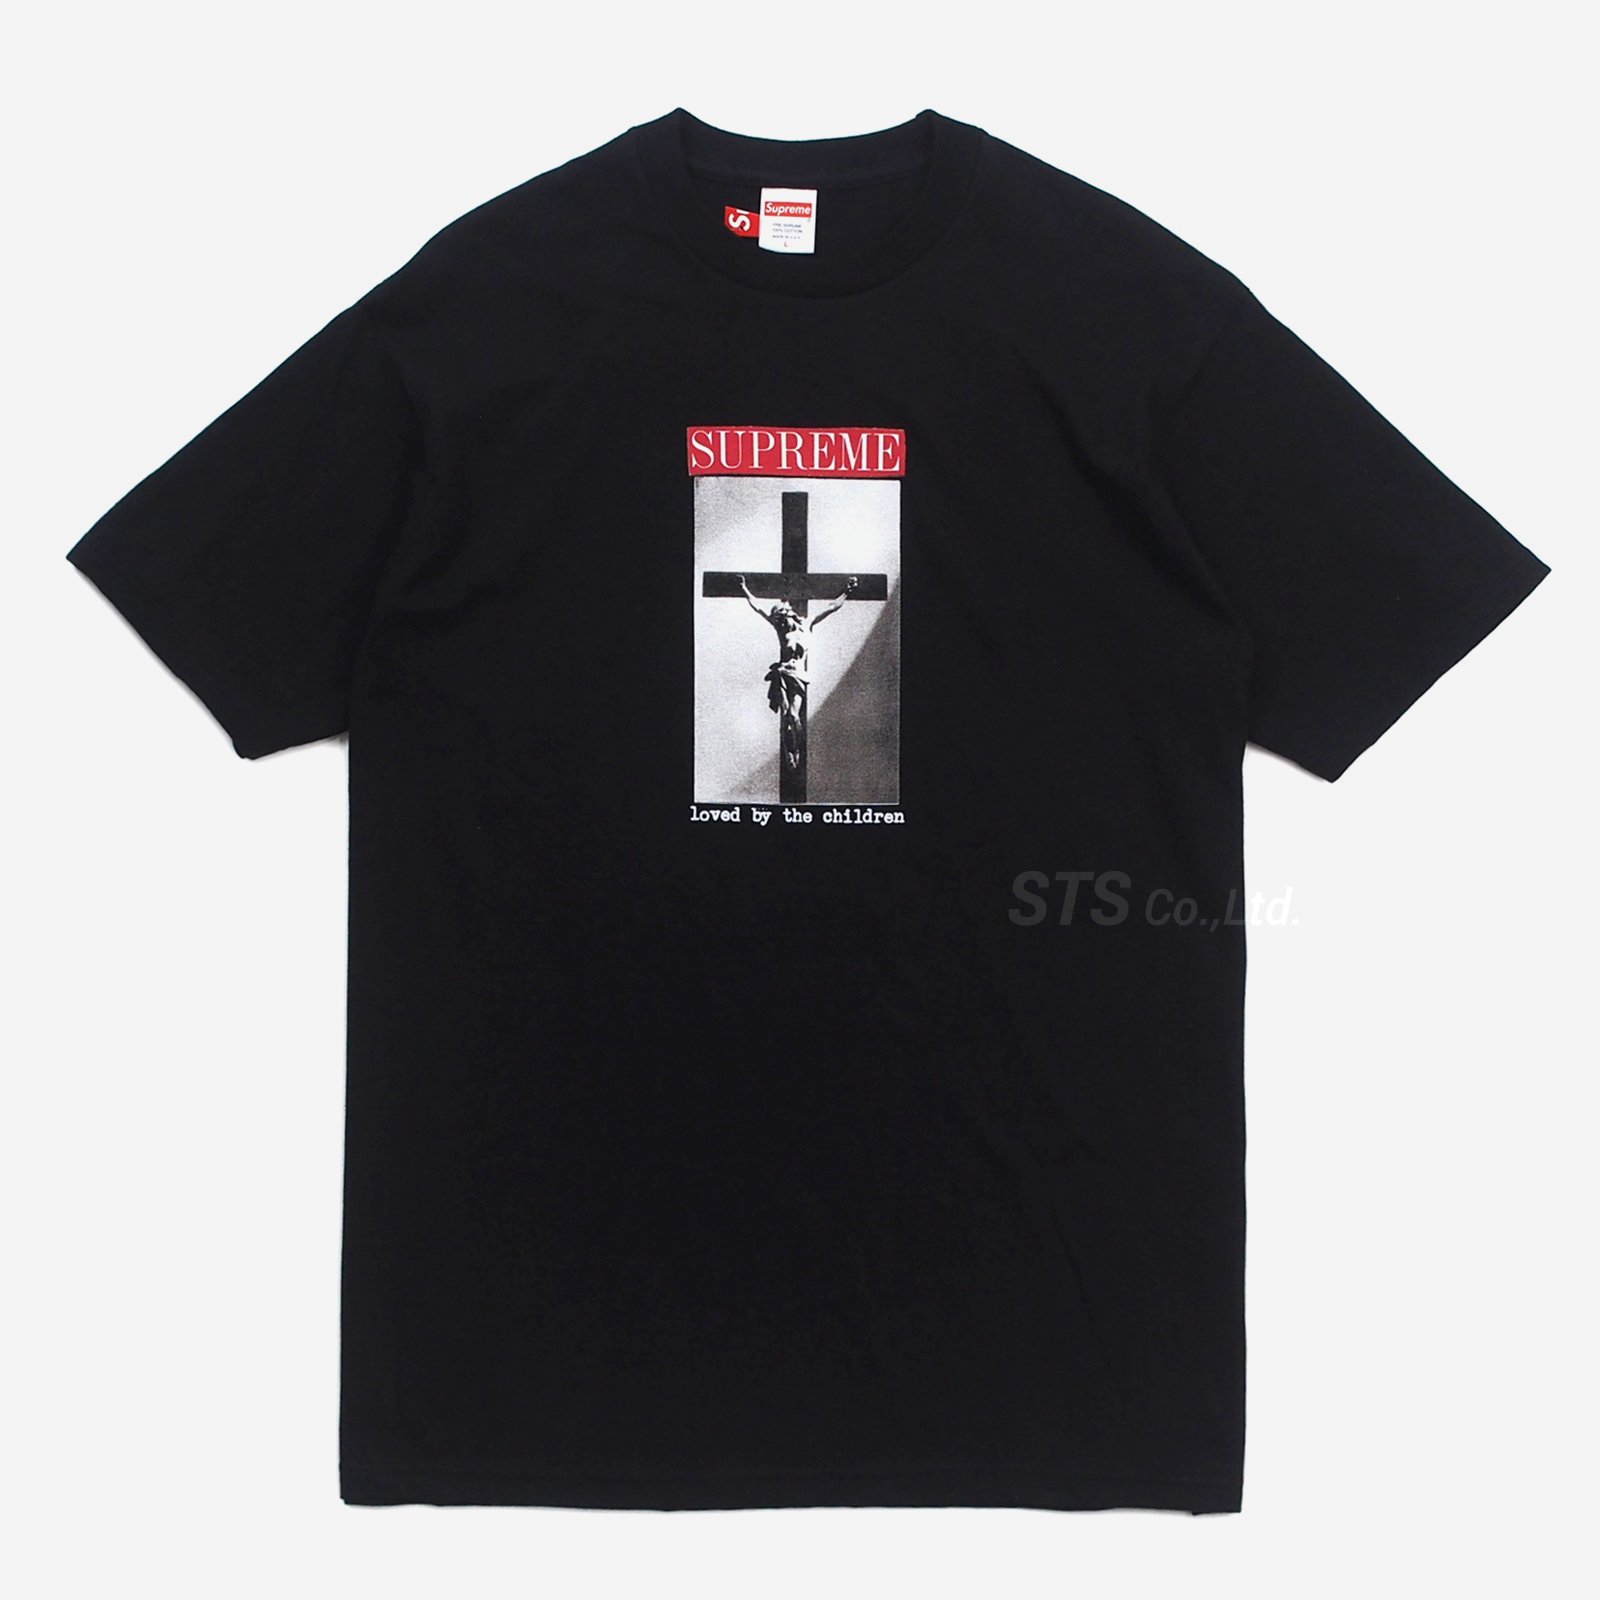 Supreme - Loved By The Children Tee - ParkSIDER